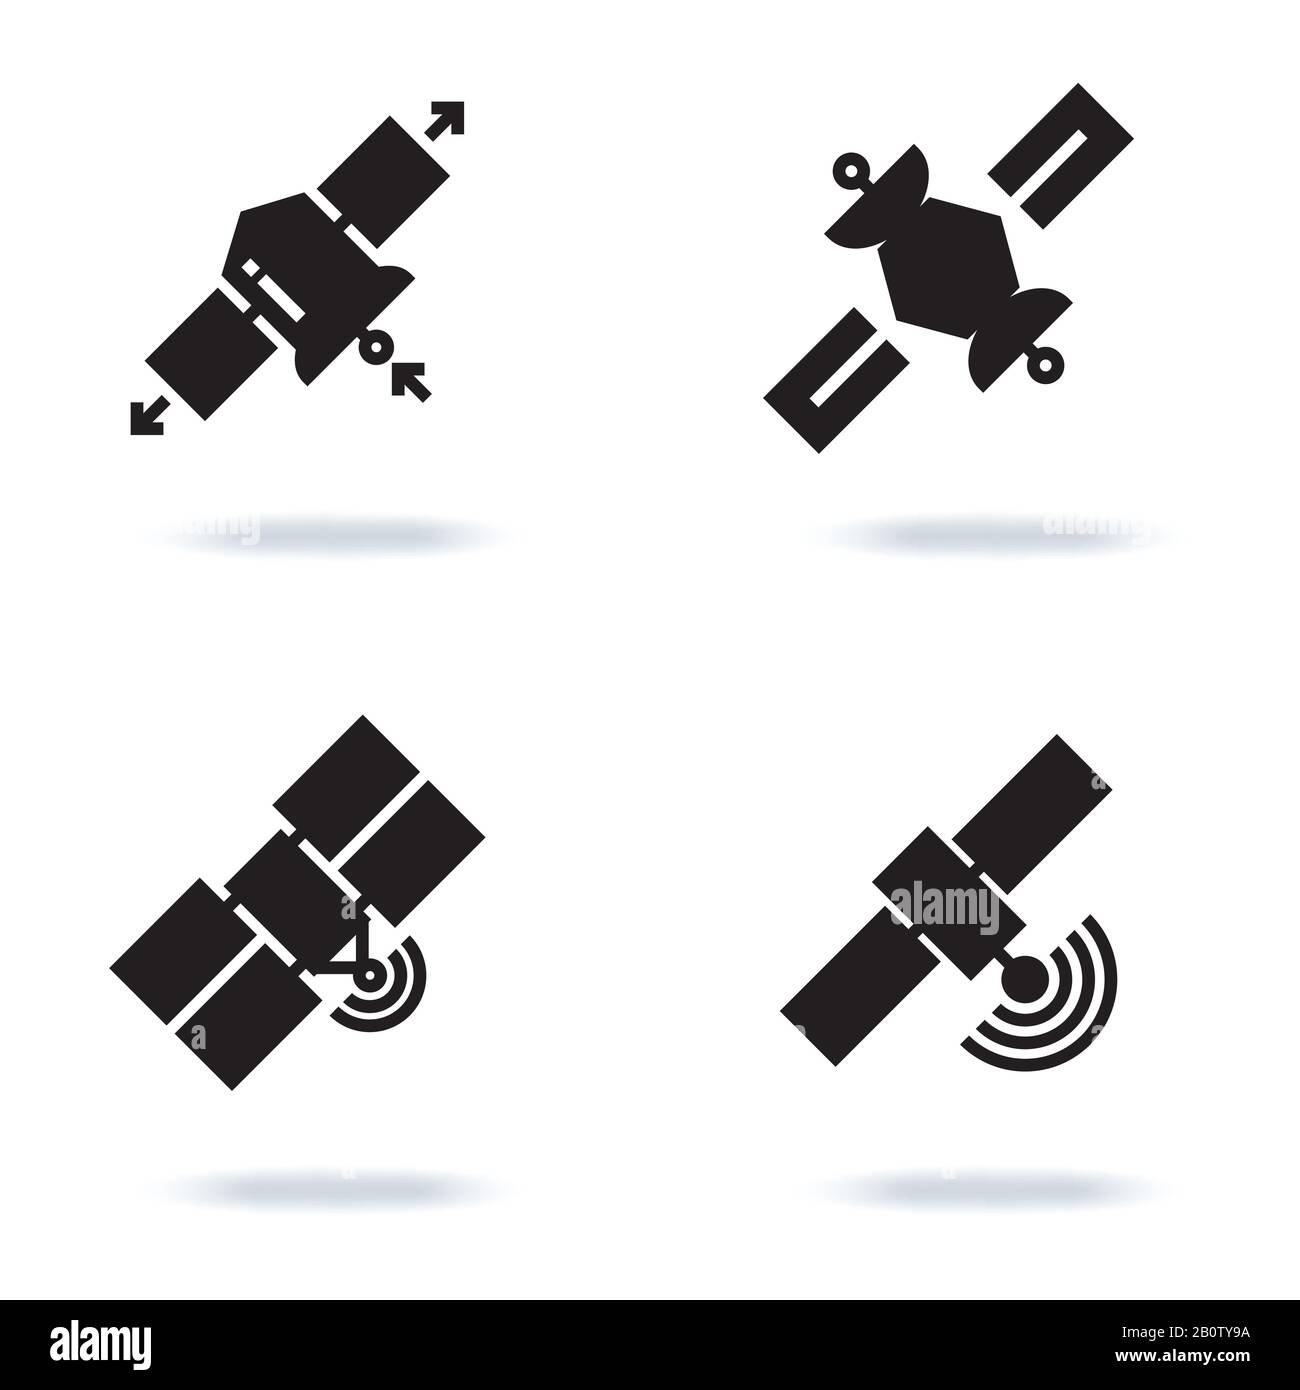 Satellite and orbit communication icons isolated on white background. Technology space vector illustration Stock Vector